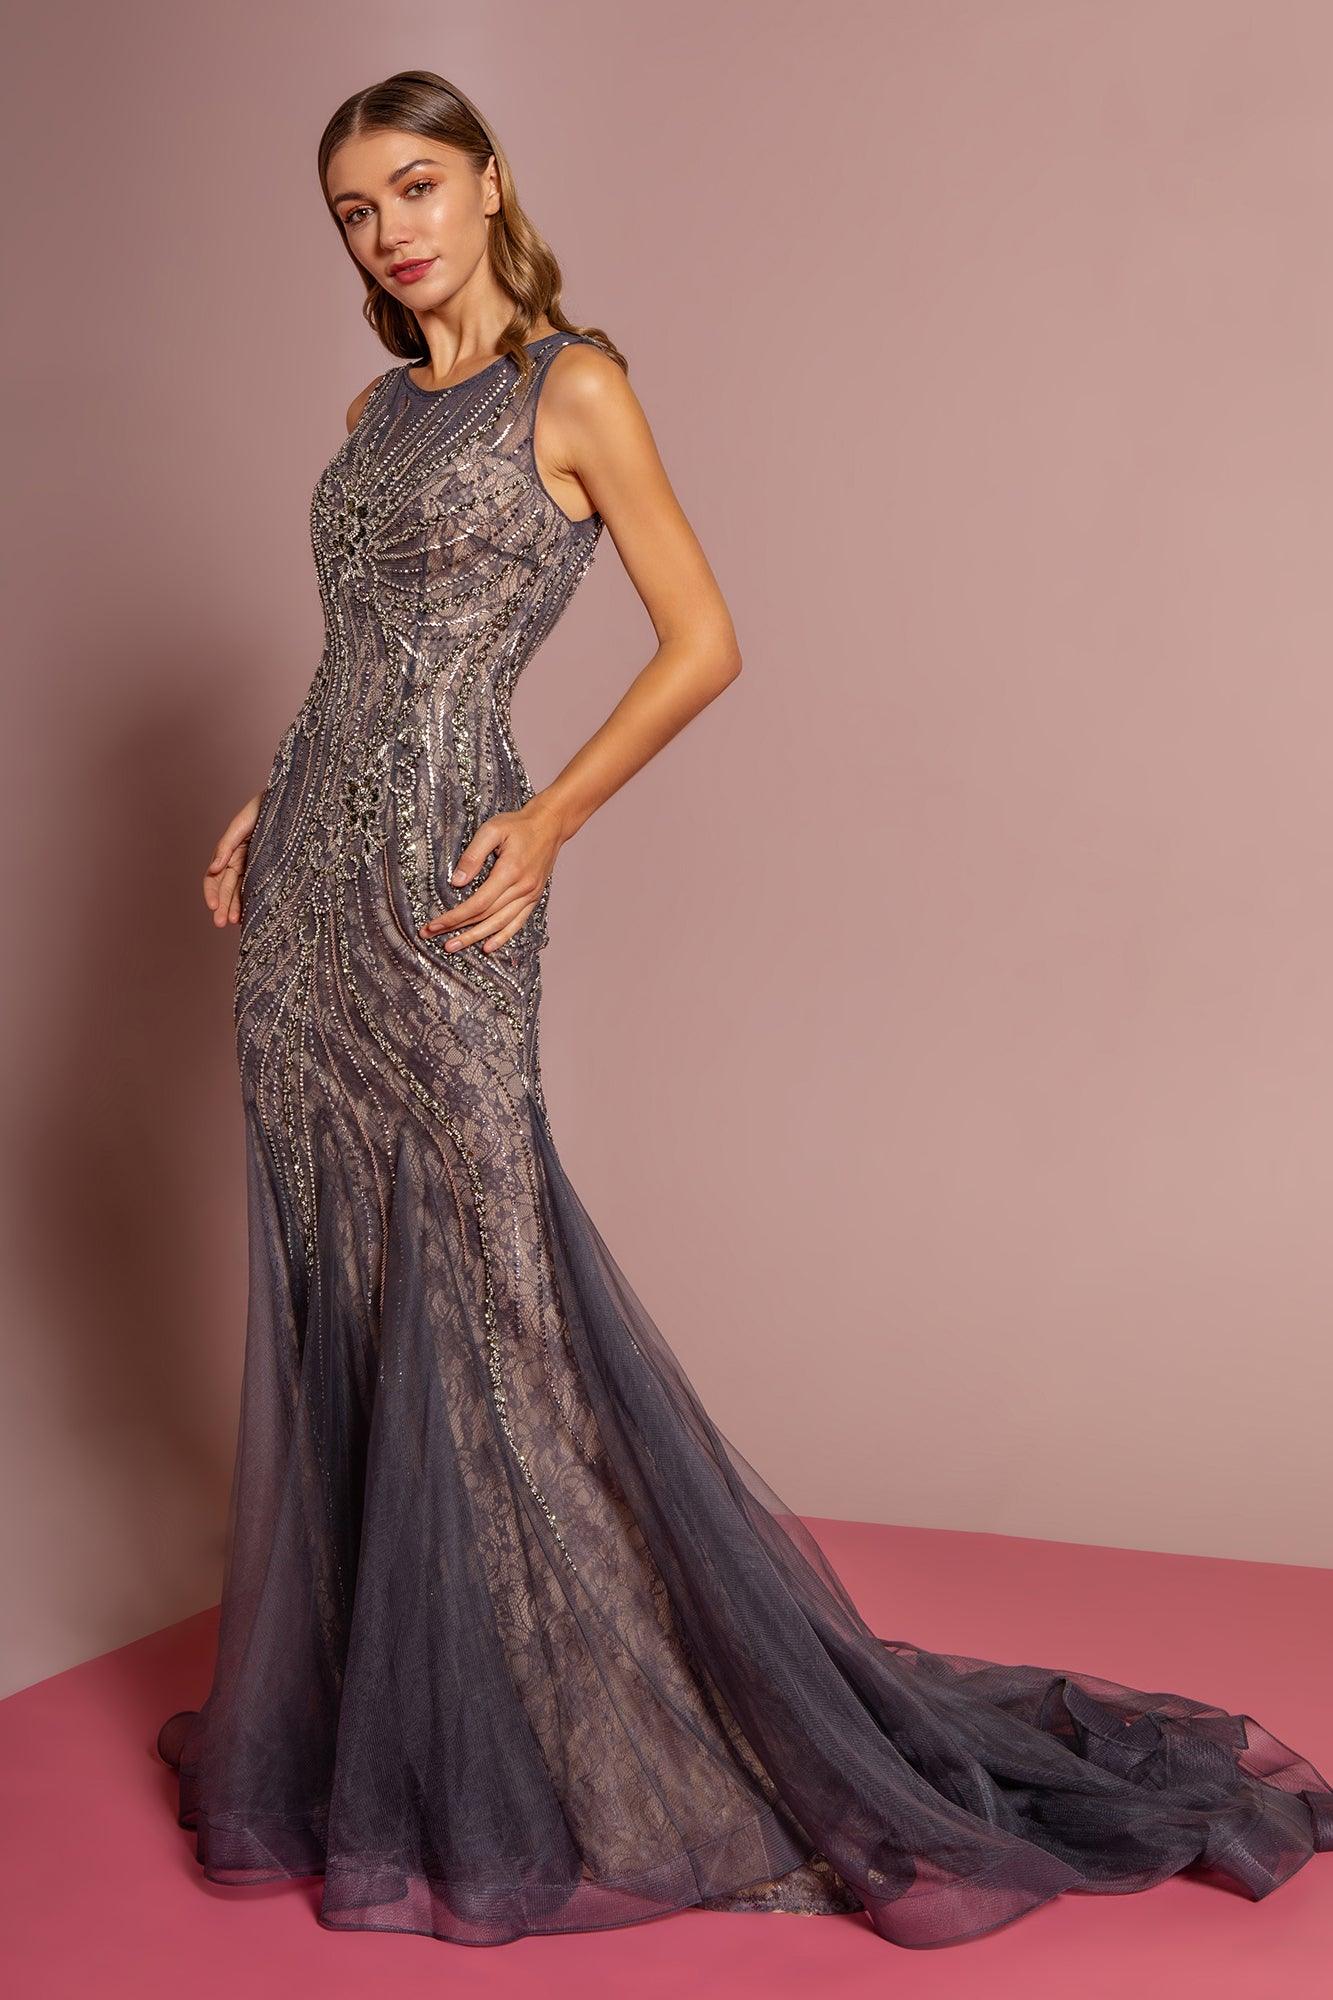 Jewel Embellished Lace Long Prom Dress With Tail - The Dress Outlet Elizabeth K